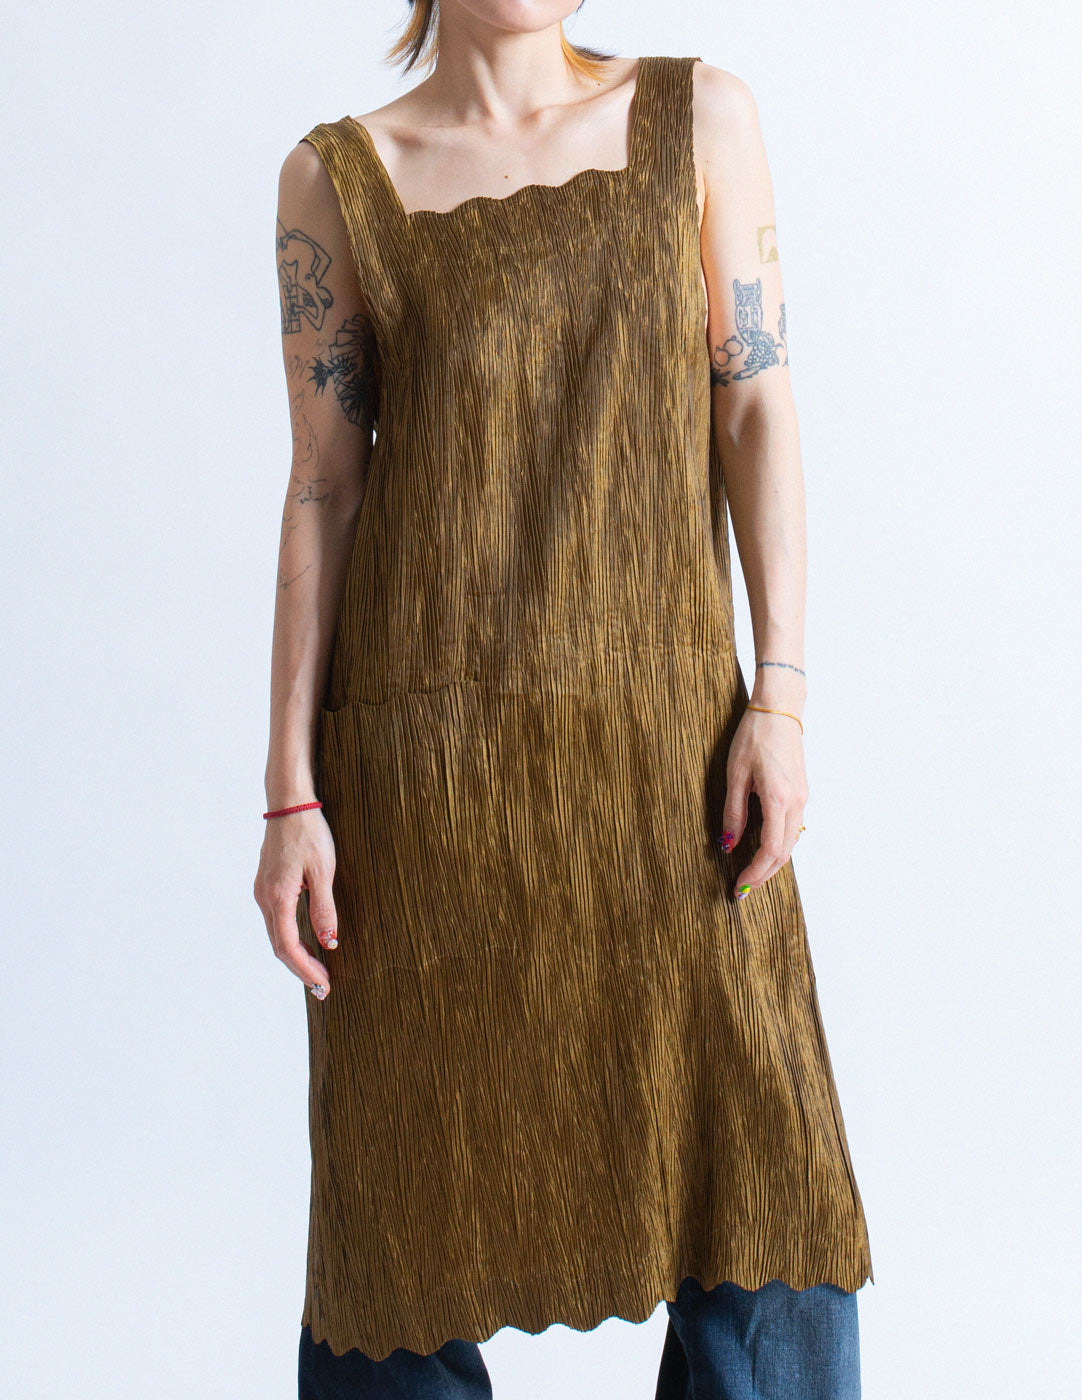 Issey Miyake bronze pleated apron dress front detail